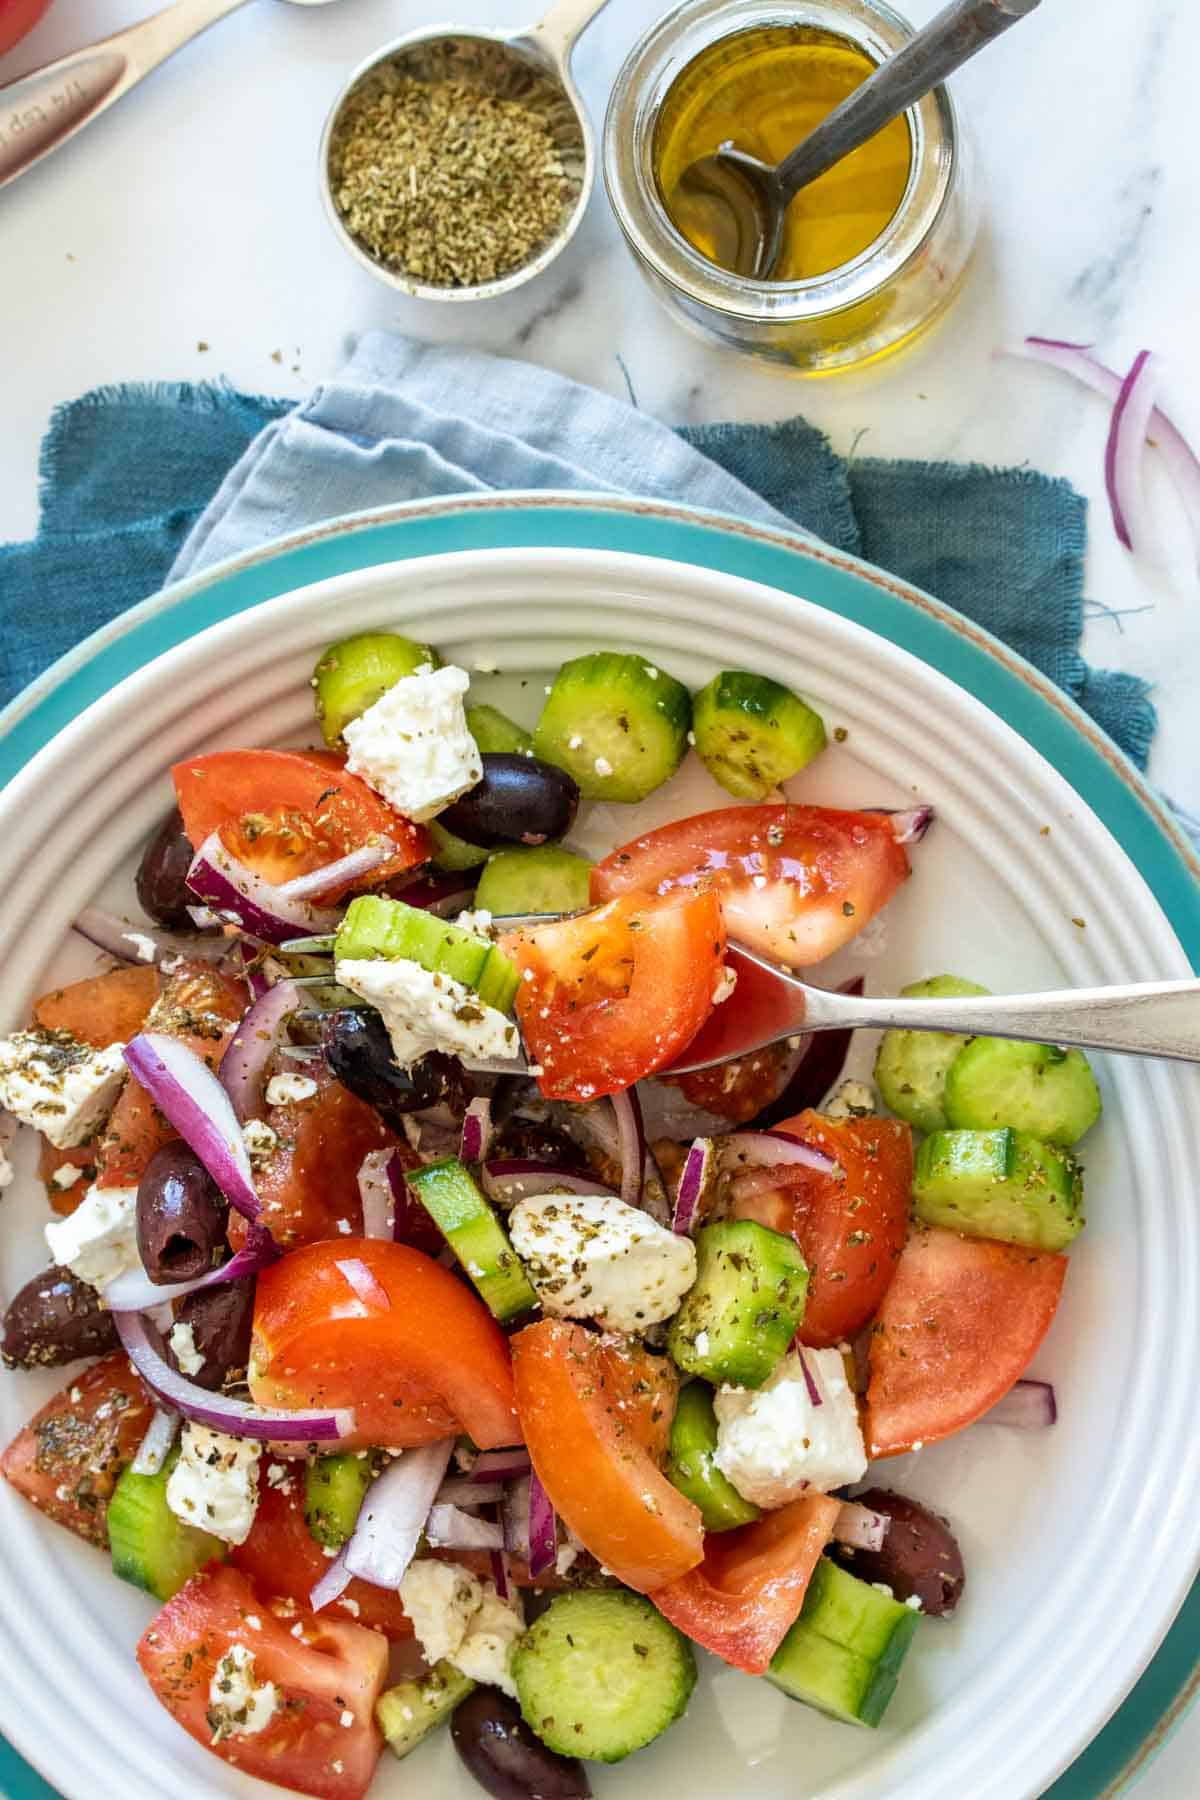 A fork getting a bite of Greek salad from a white bowl thats on a blue towel